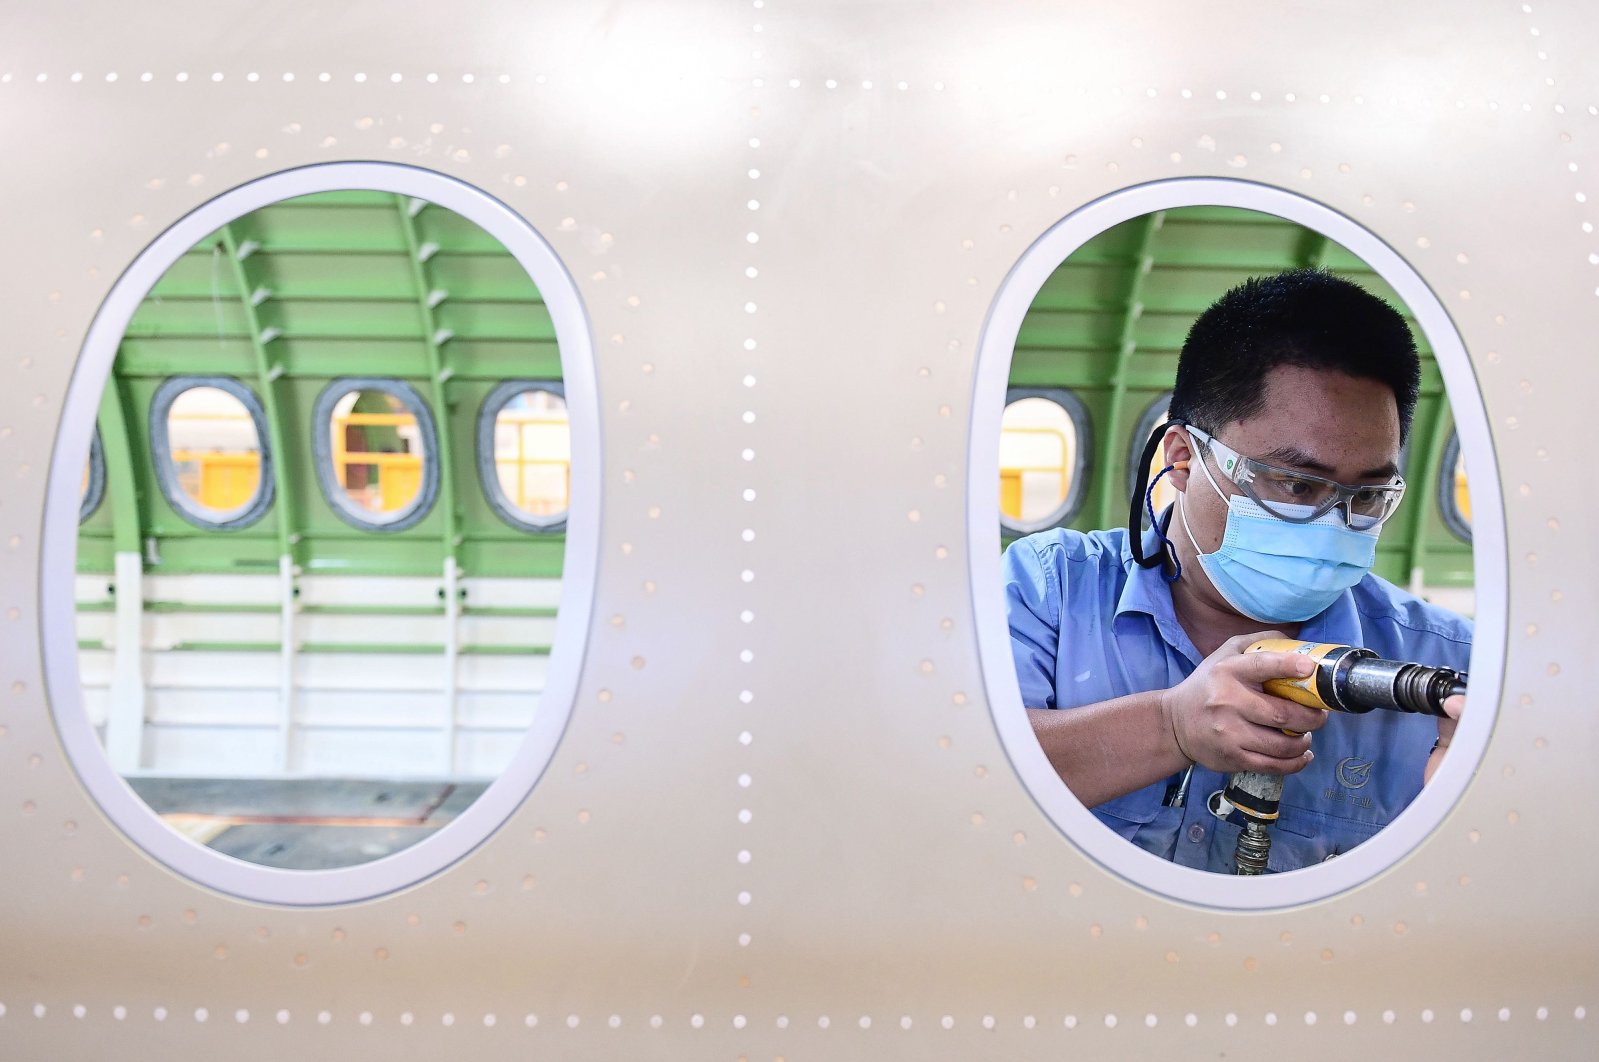 A Chinese employee works on the interior of an Airbus A220 aircraft at a factory in Shenyang in China's northeastern Liaoning province, May 25, 2020. (AFP Photo)